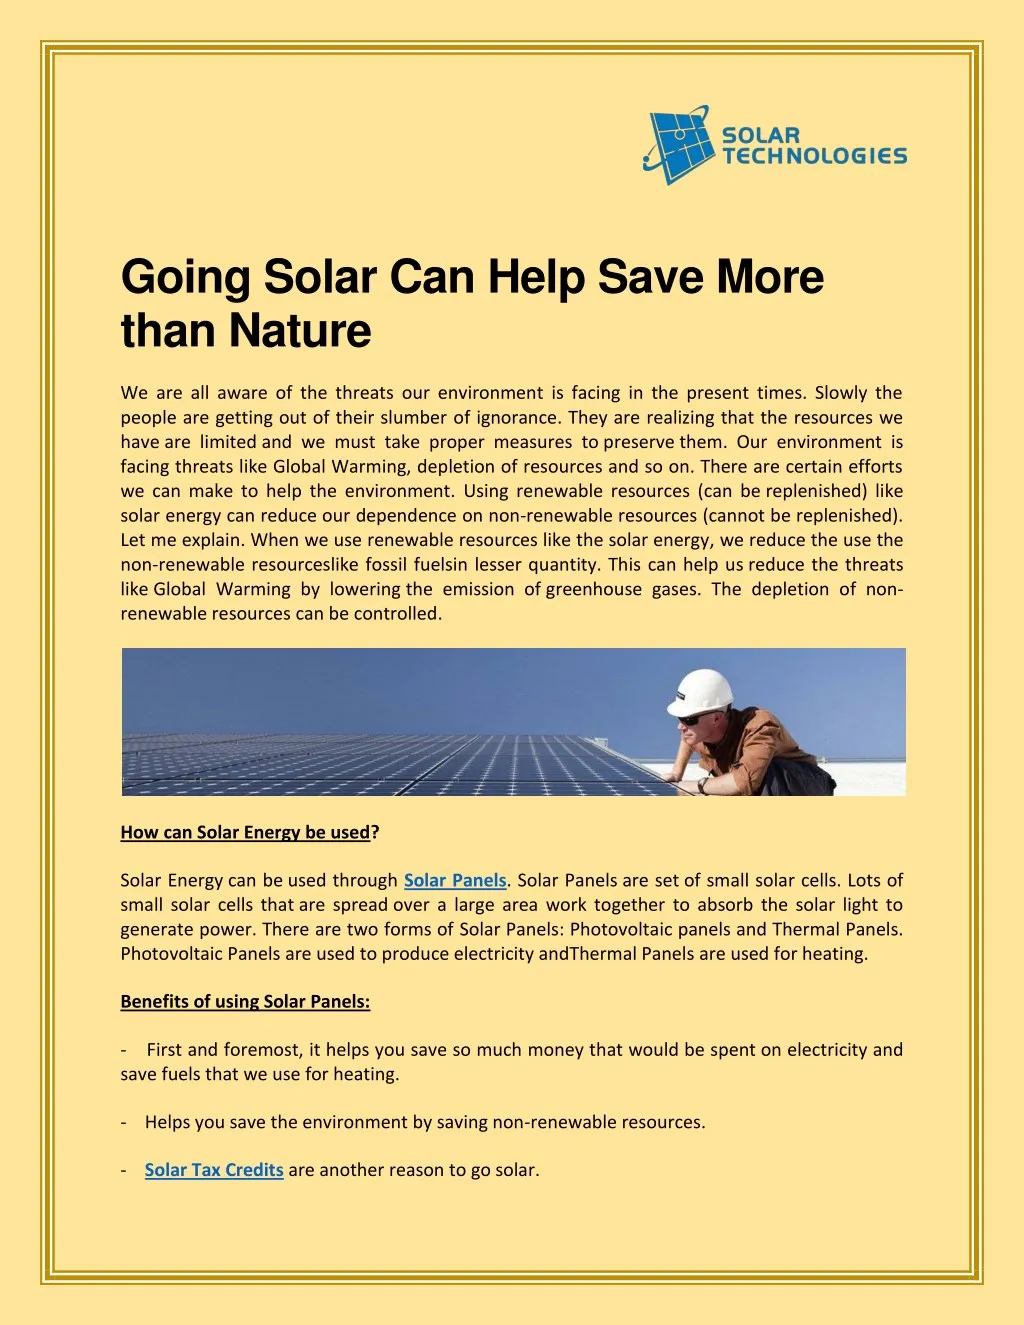 going solar can help save more than nature